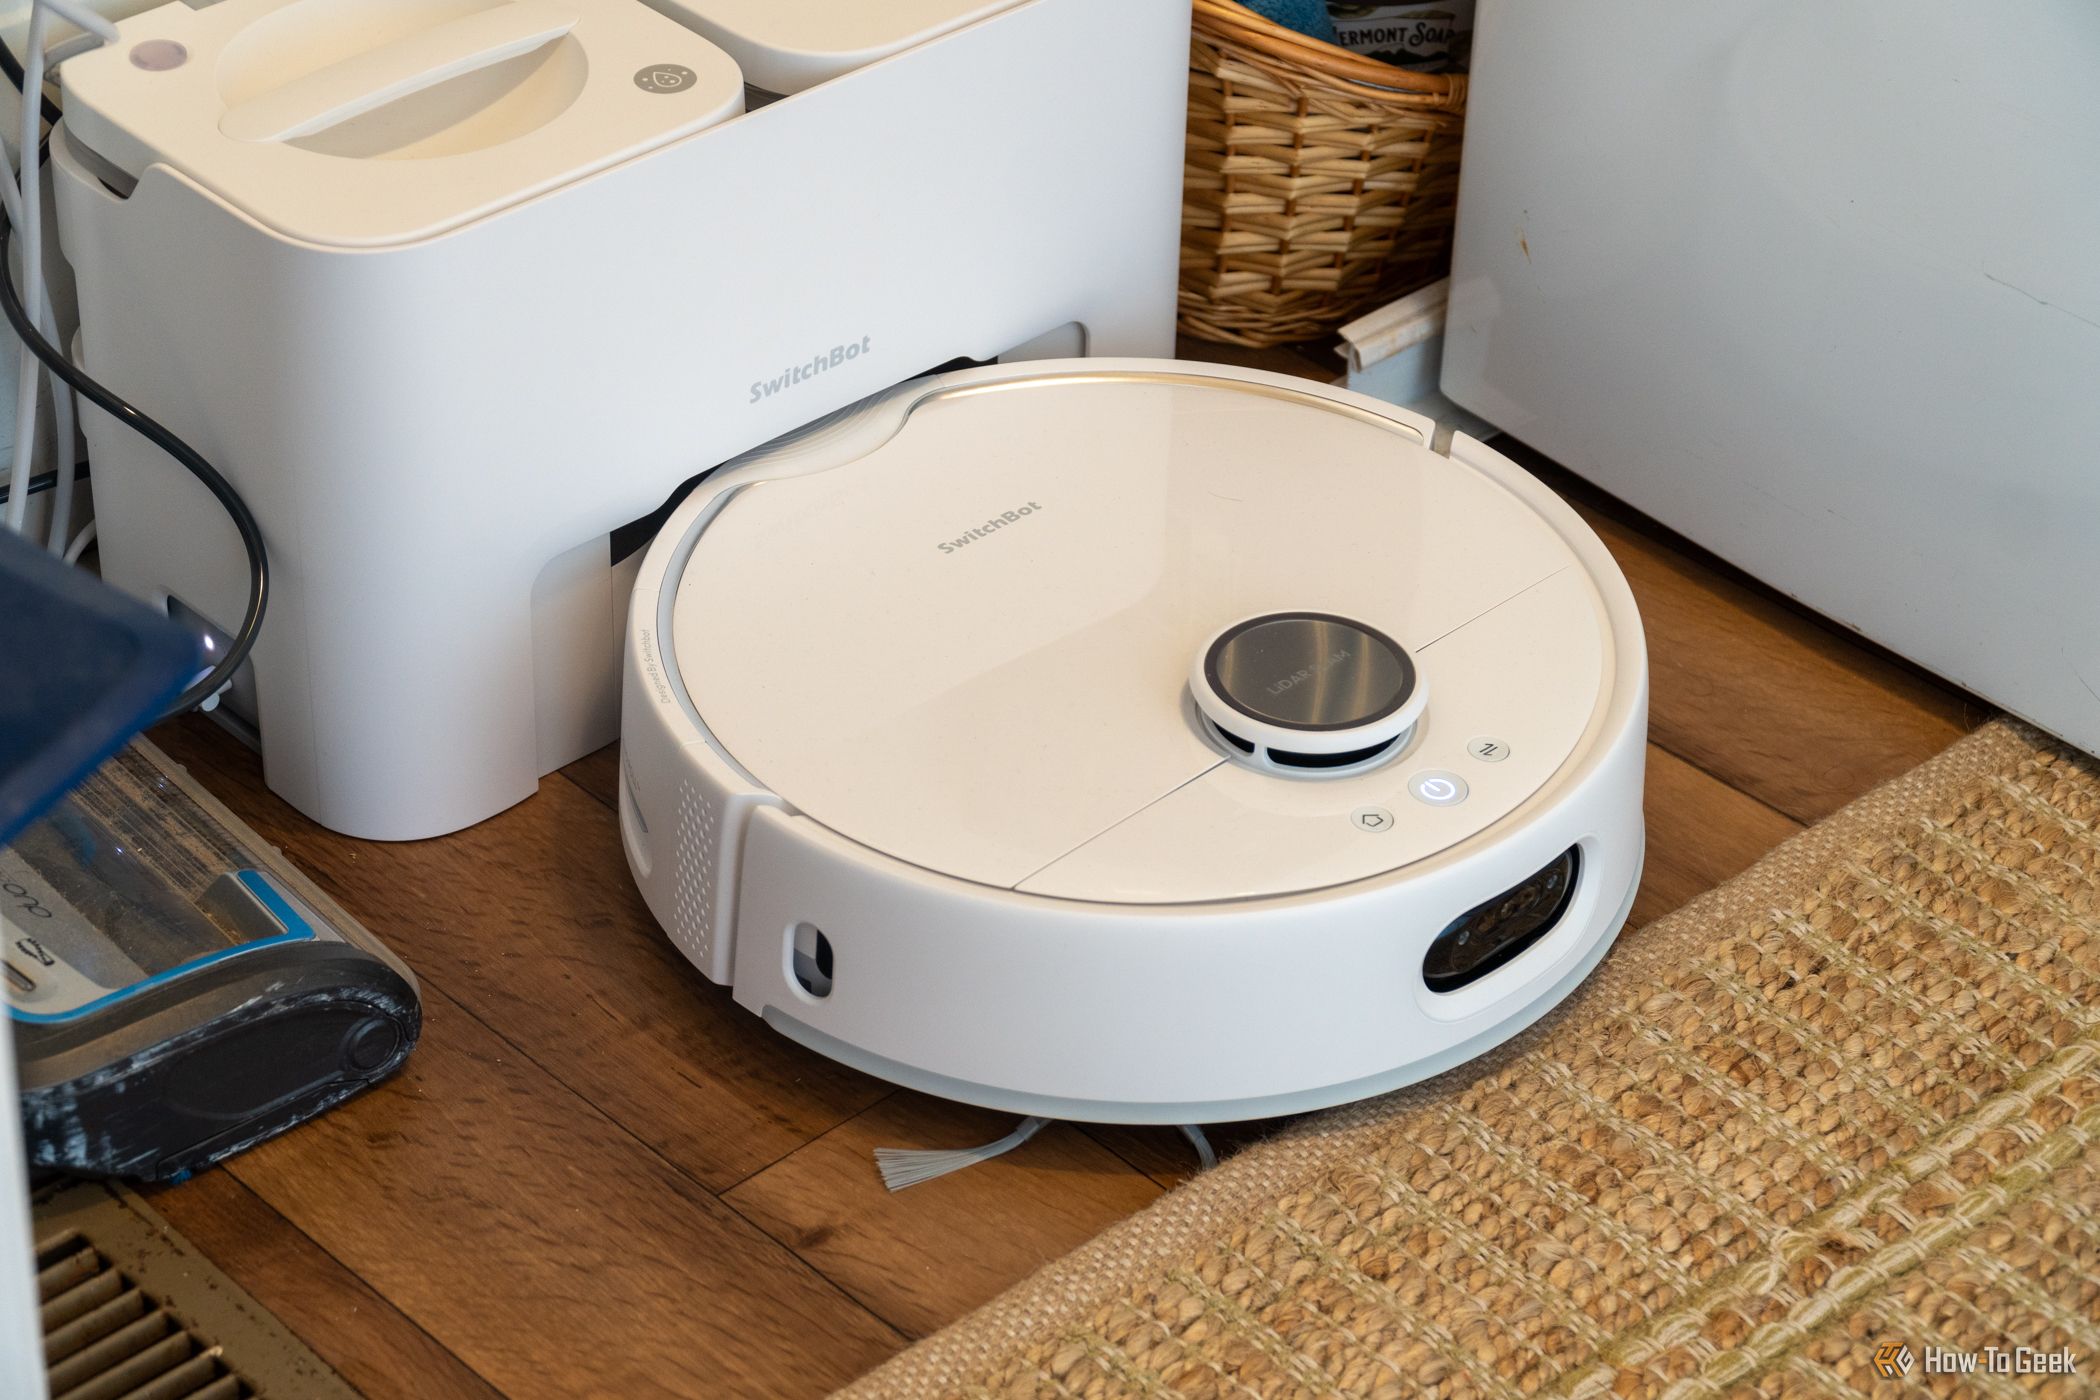 SwitchBot S10 Robot Vacuum At Water Station